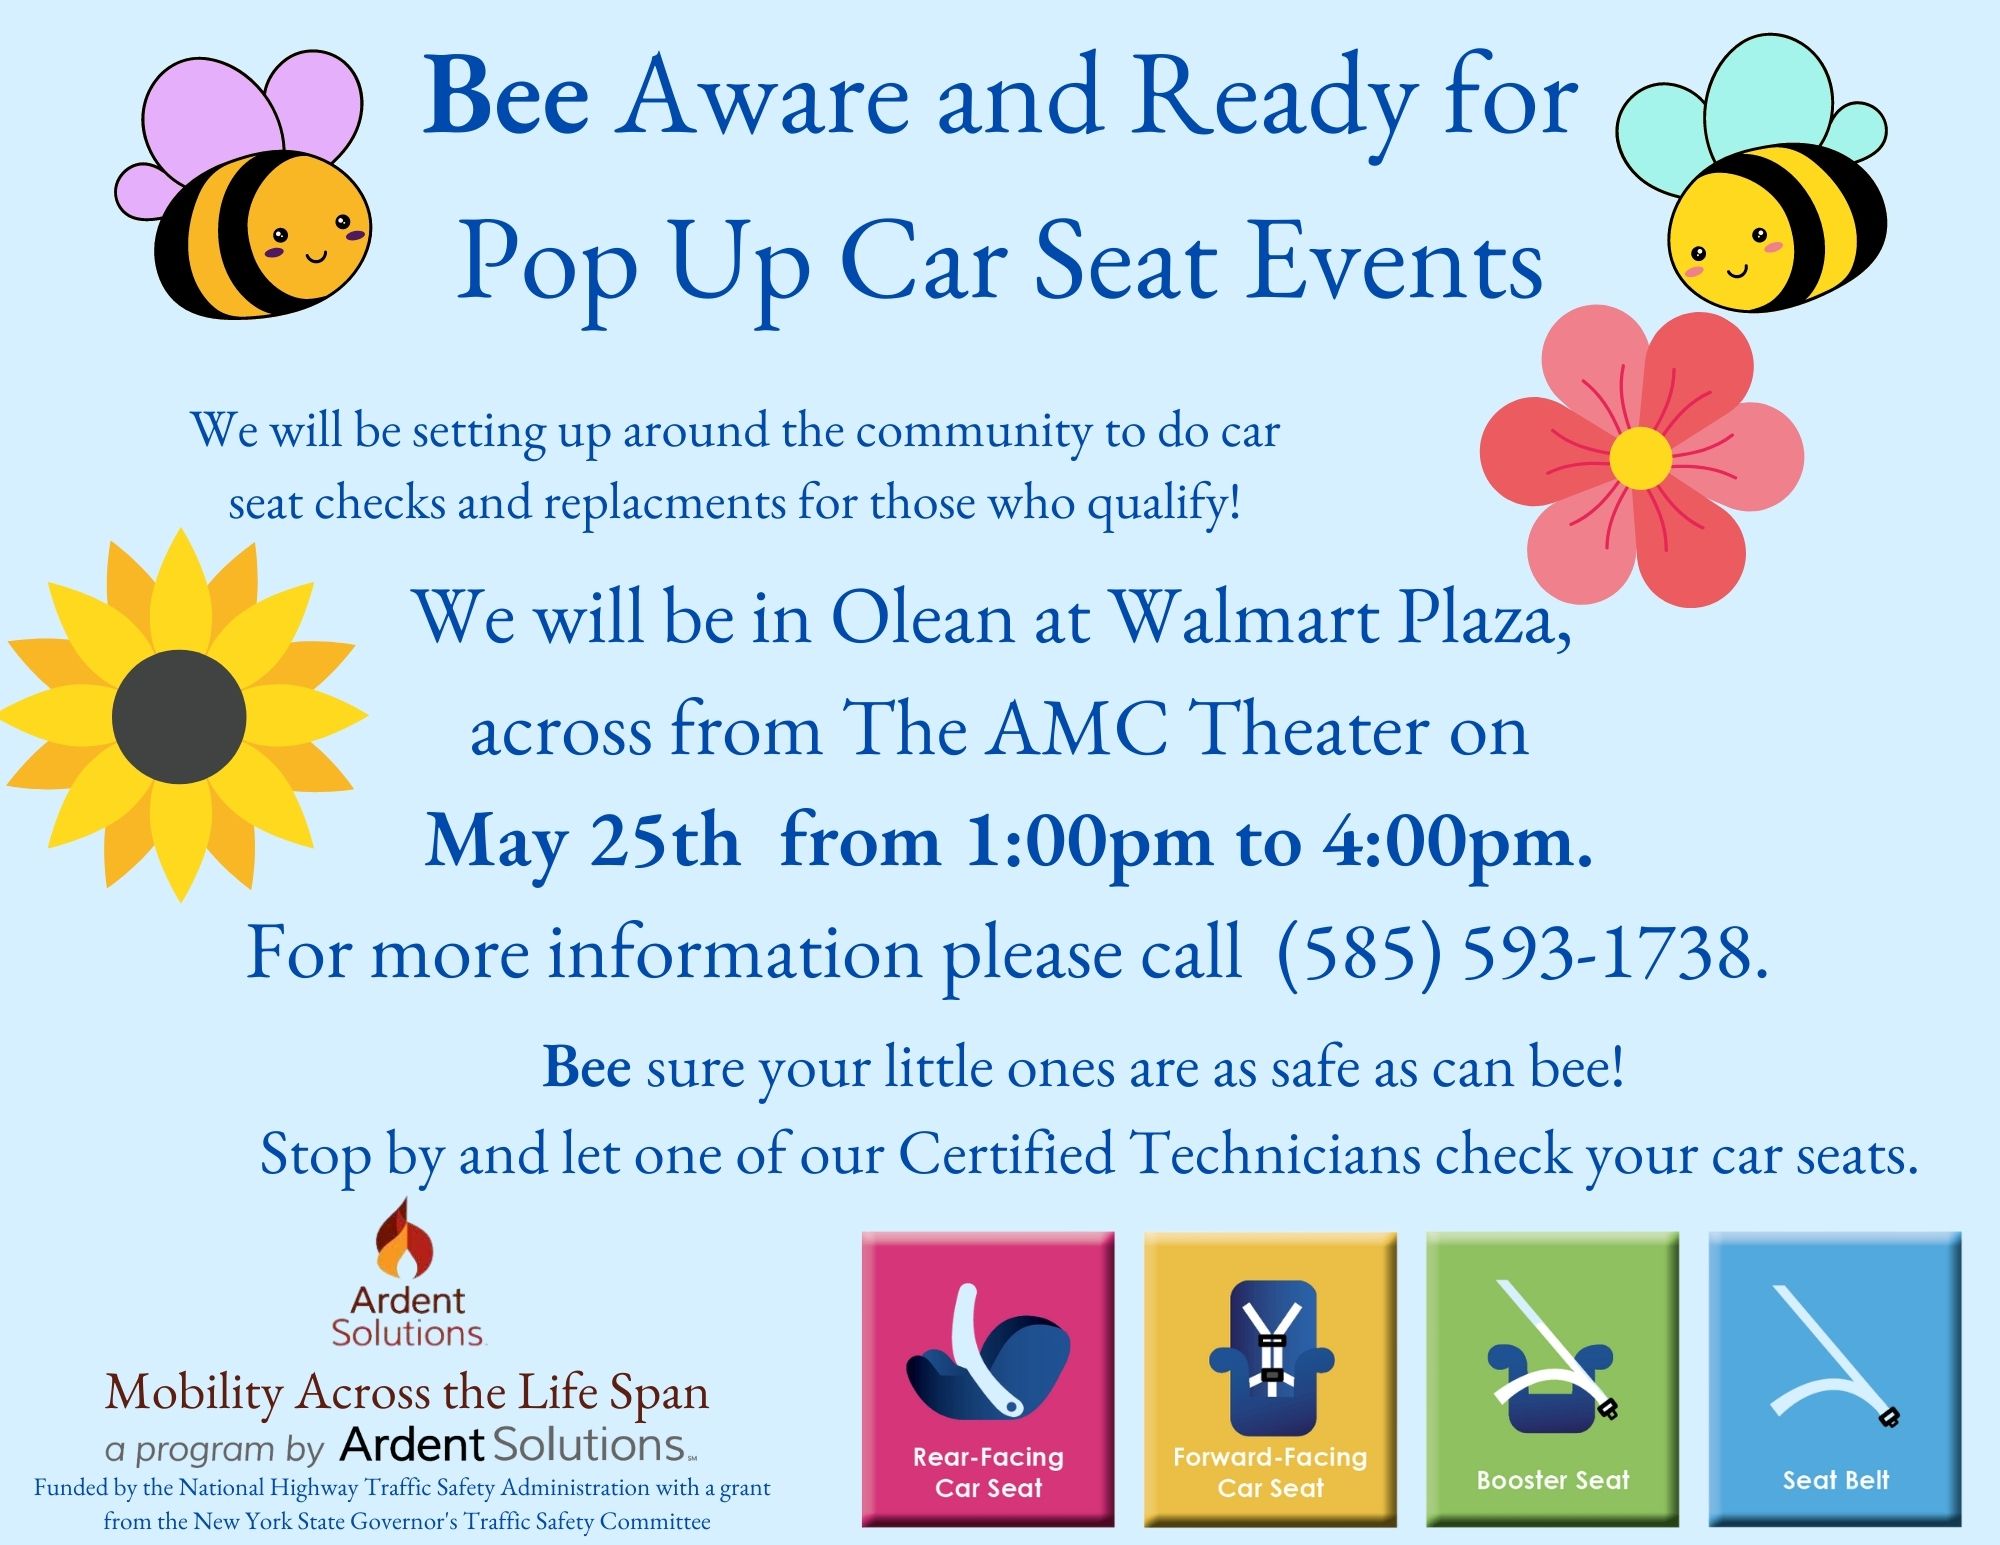 Flyer for Bee Aware and Ready for Pop Up Car Seat Events on May 25, 2022